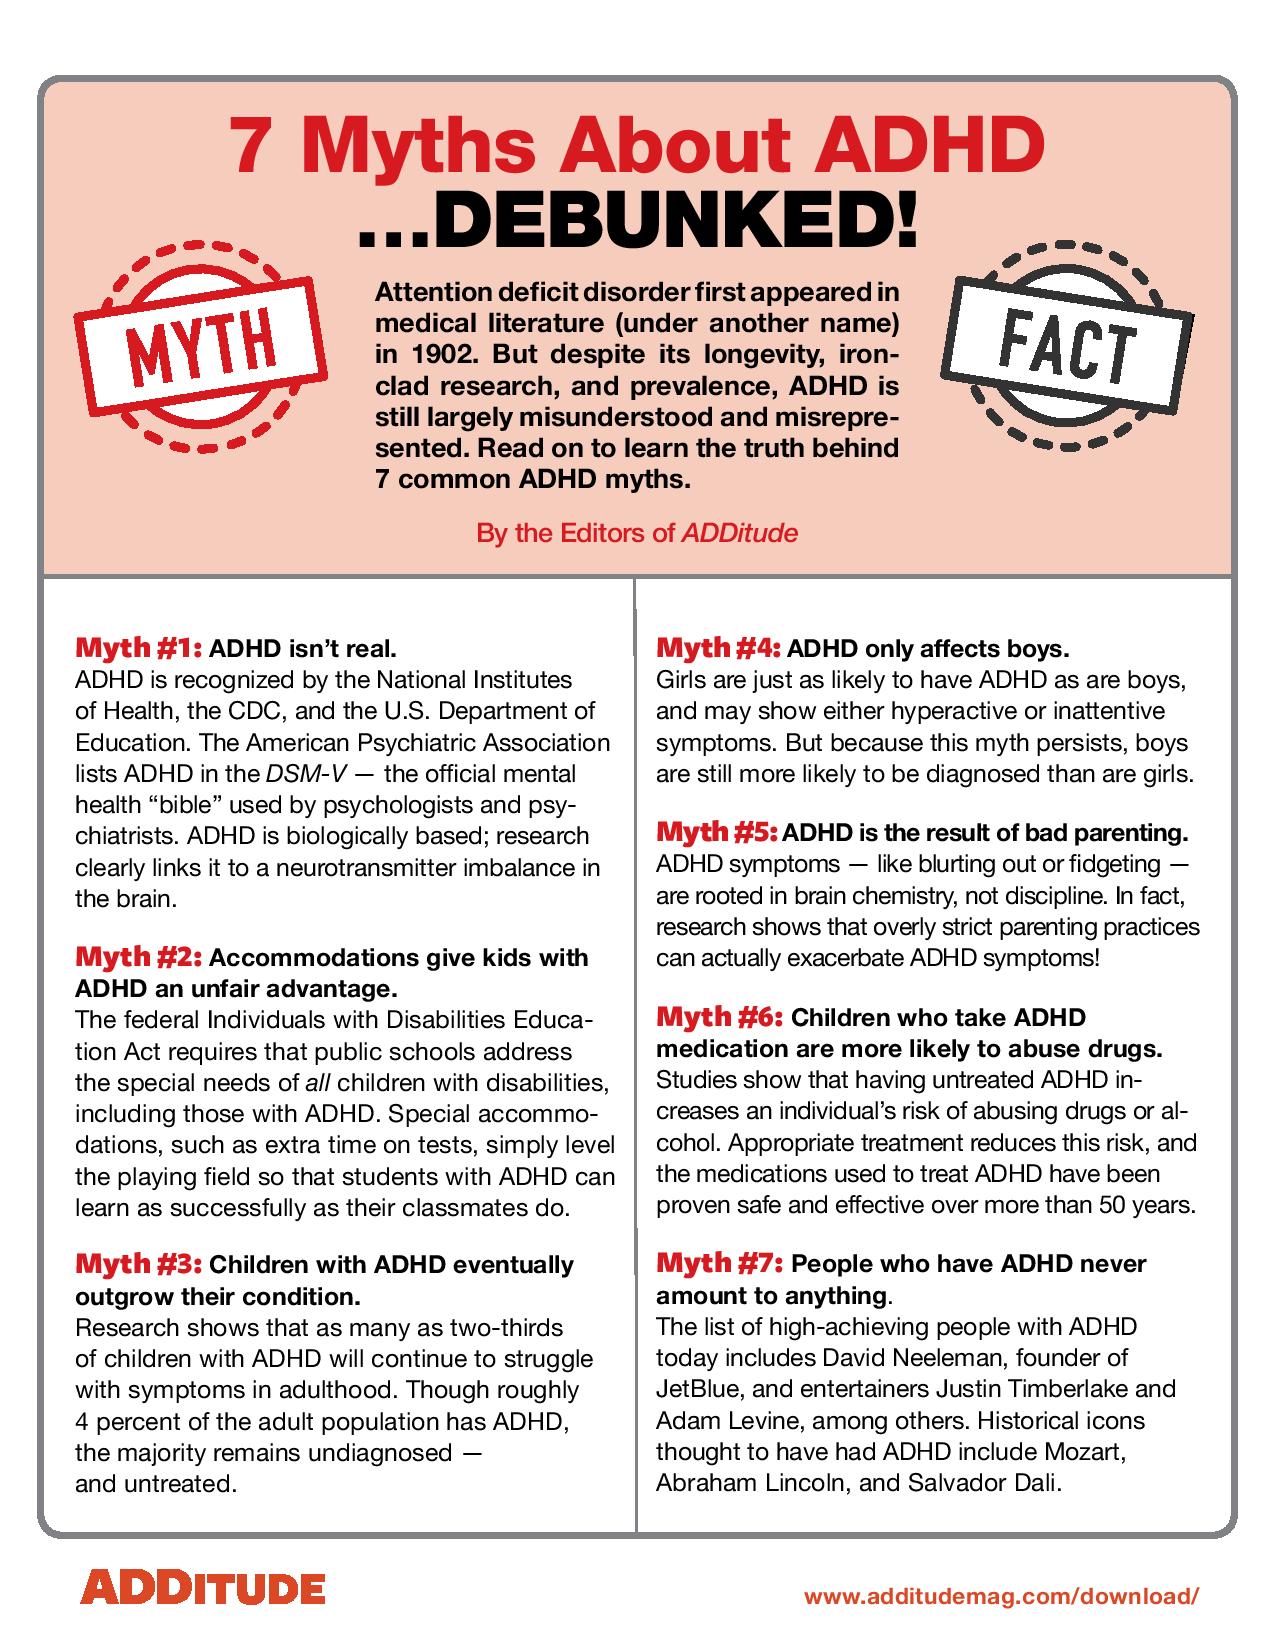 7 Myths About ADHD Debunked page 001